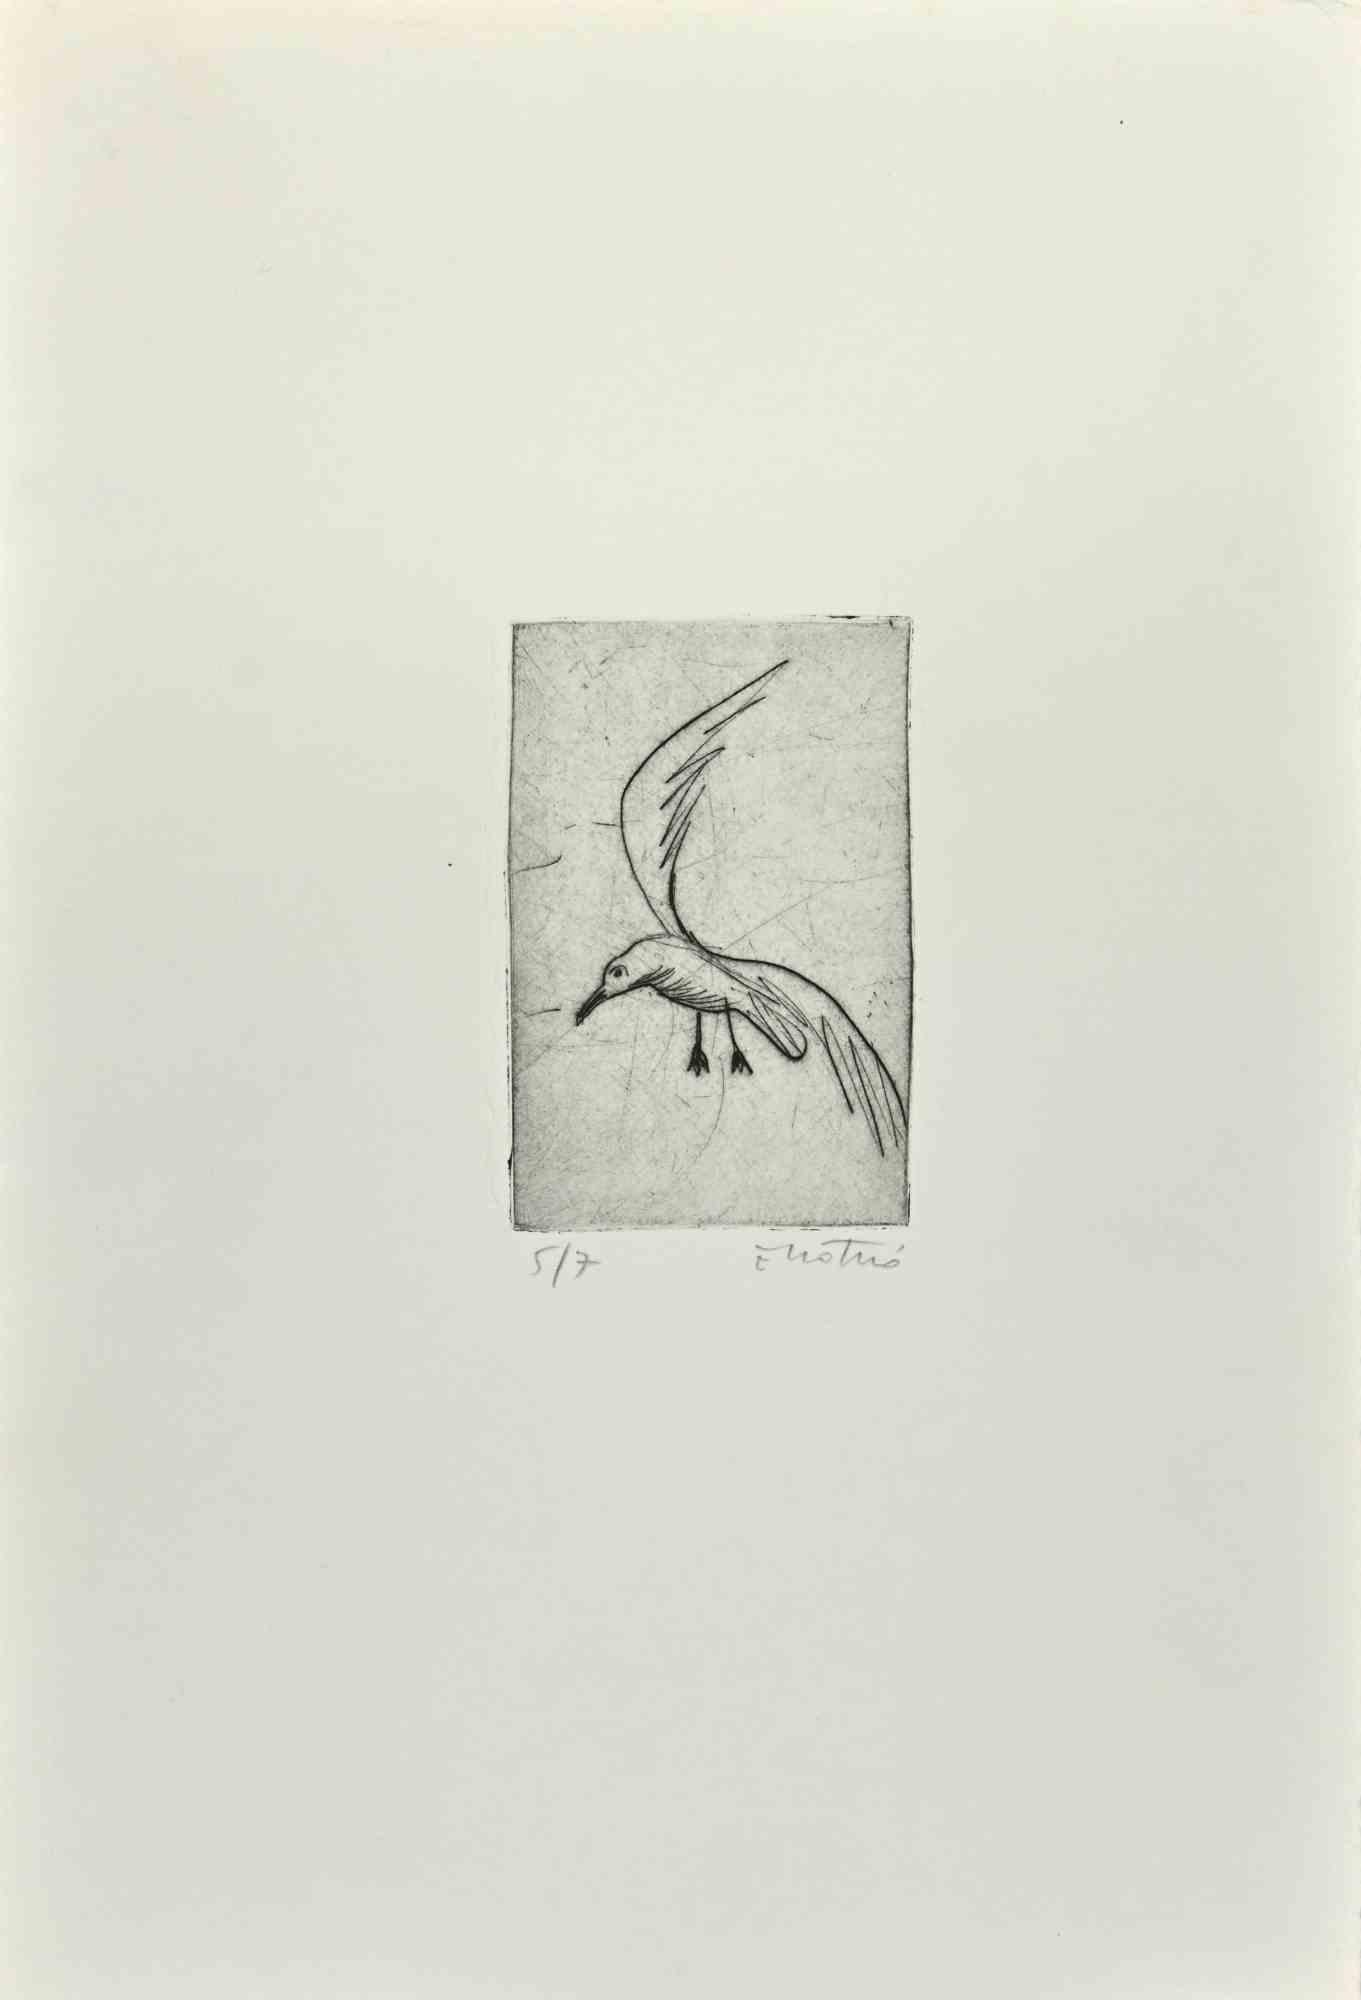 Seagull - Etching by Enotrio Pugliese - 1963